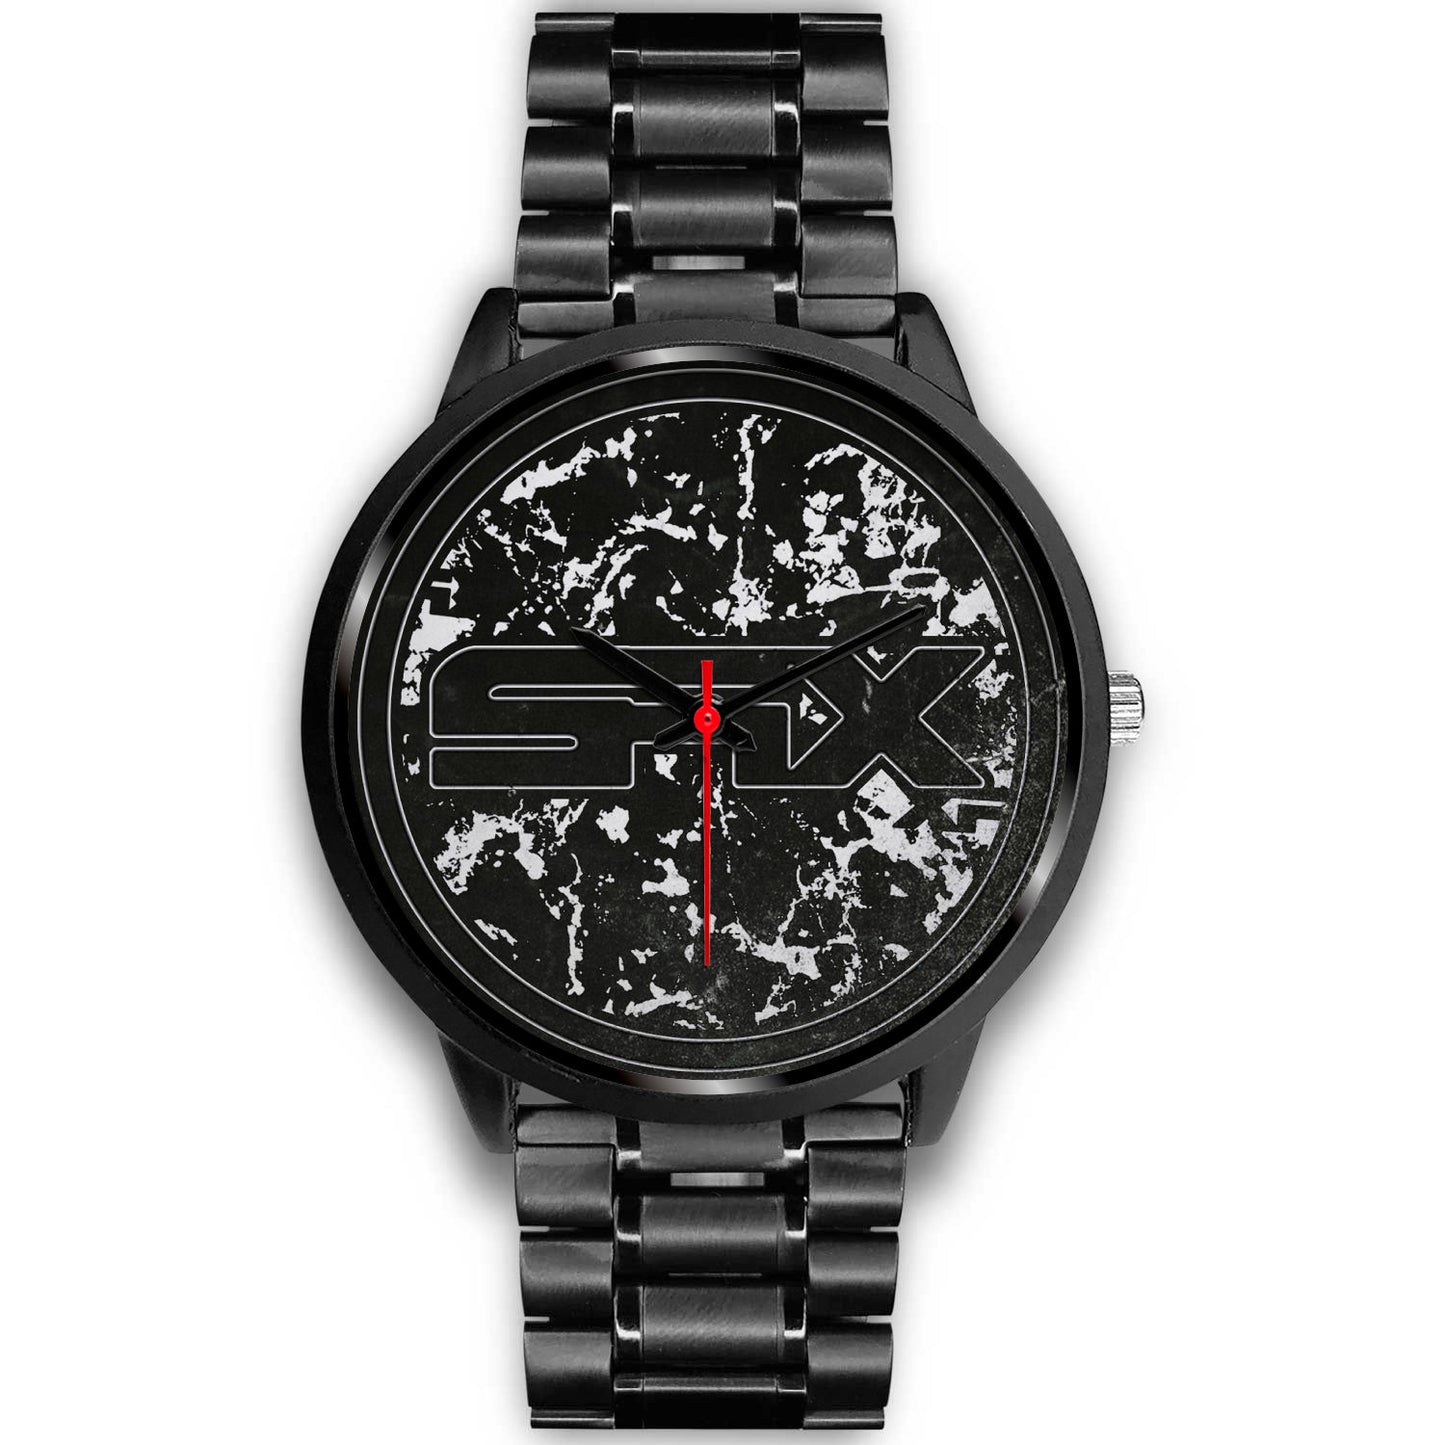 BLACKED OUT WATCH